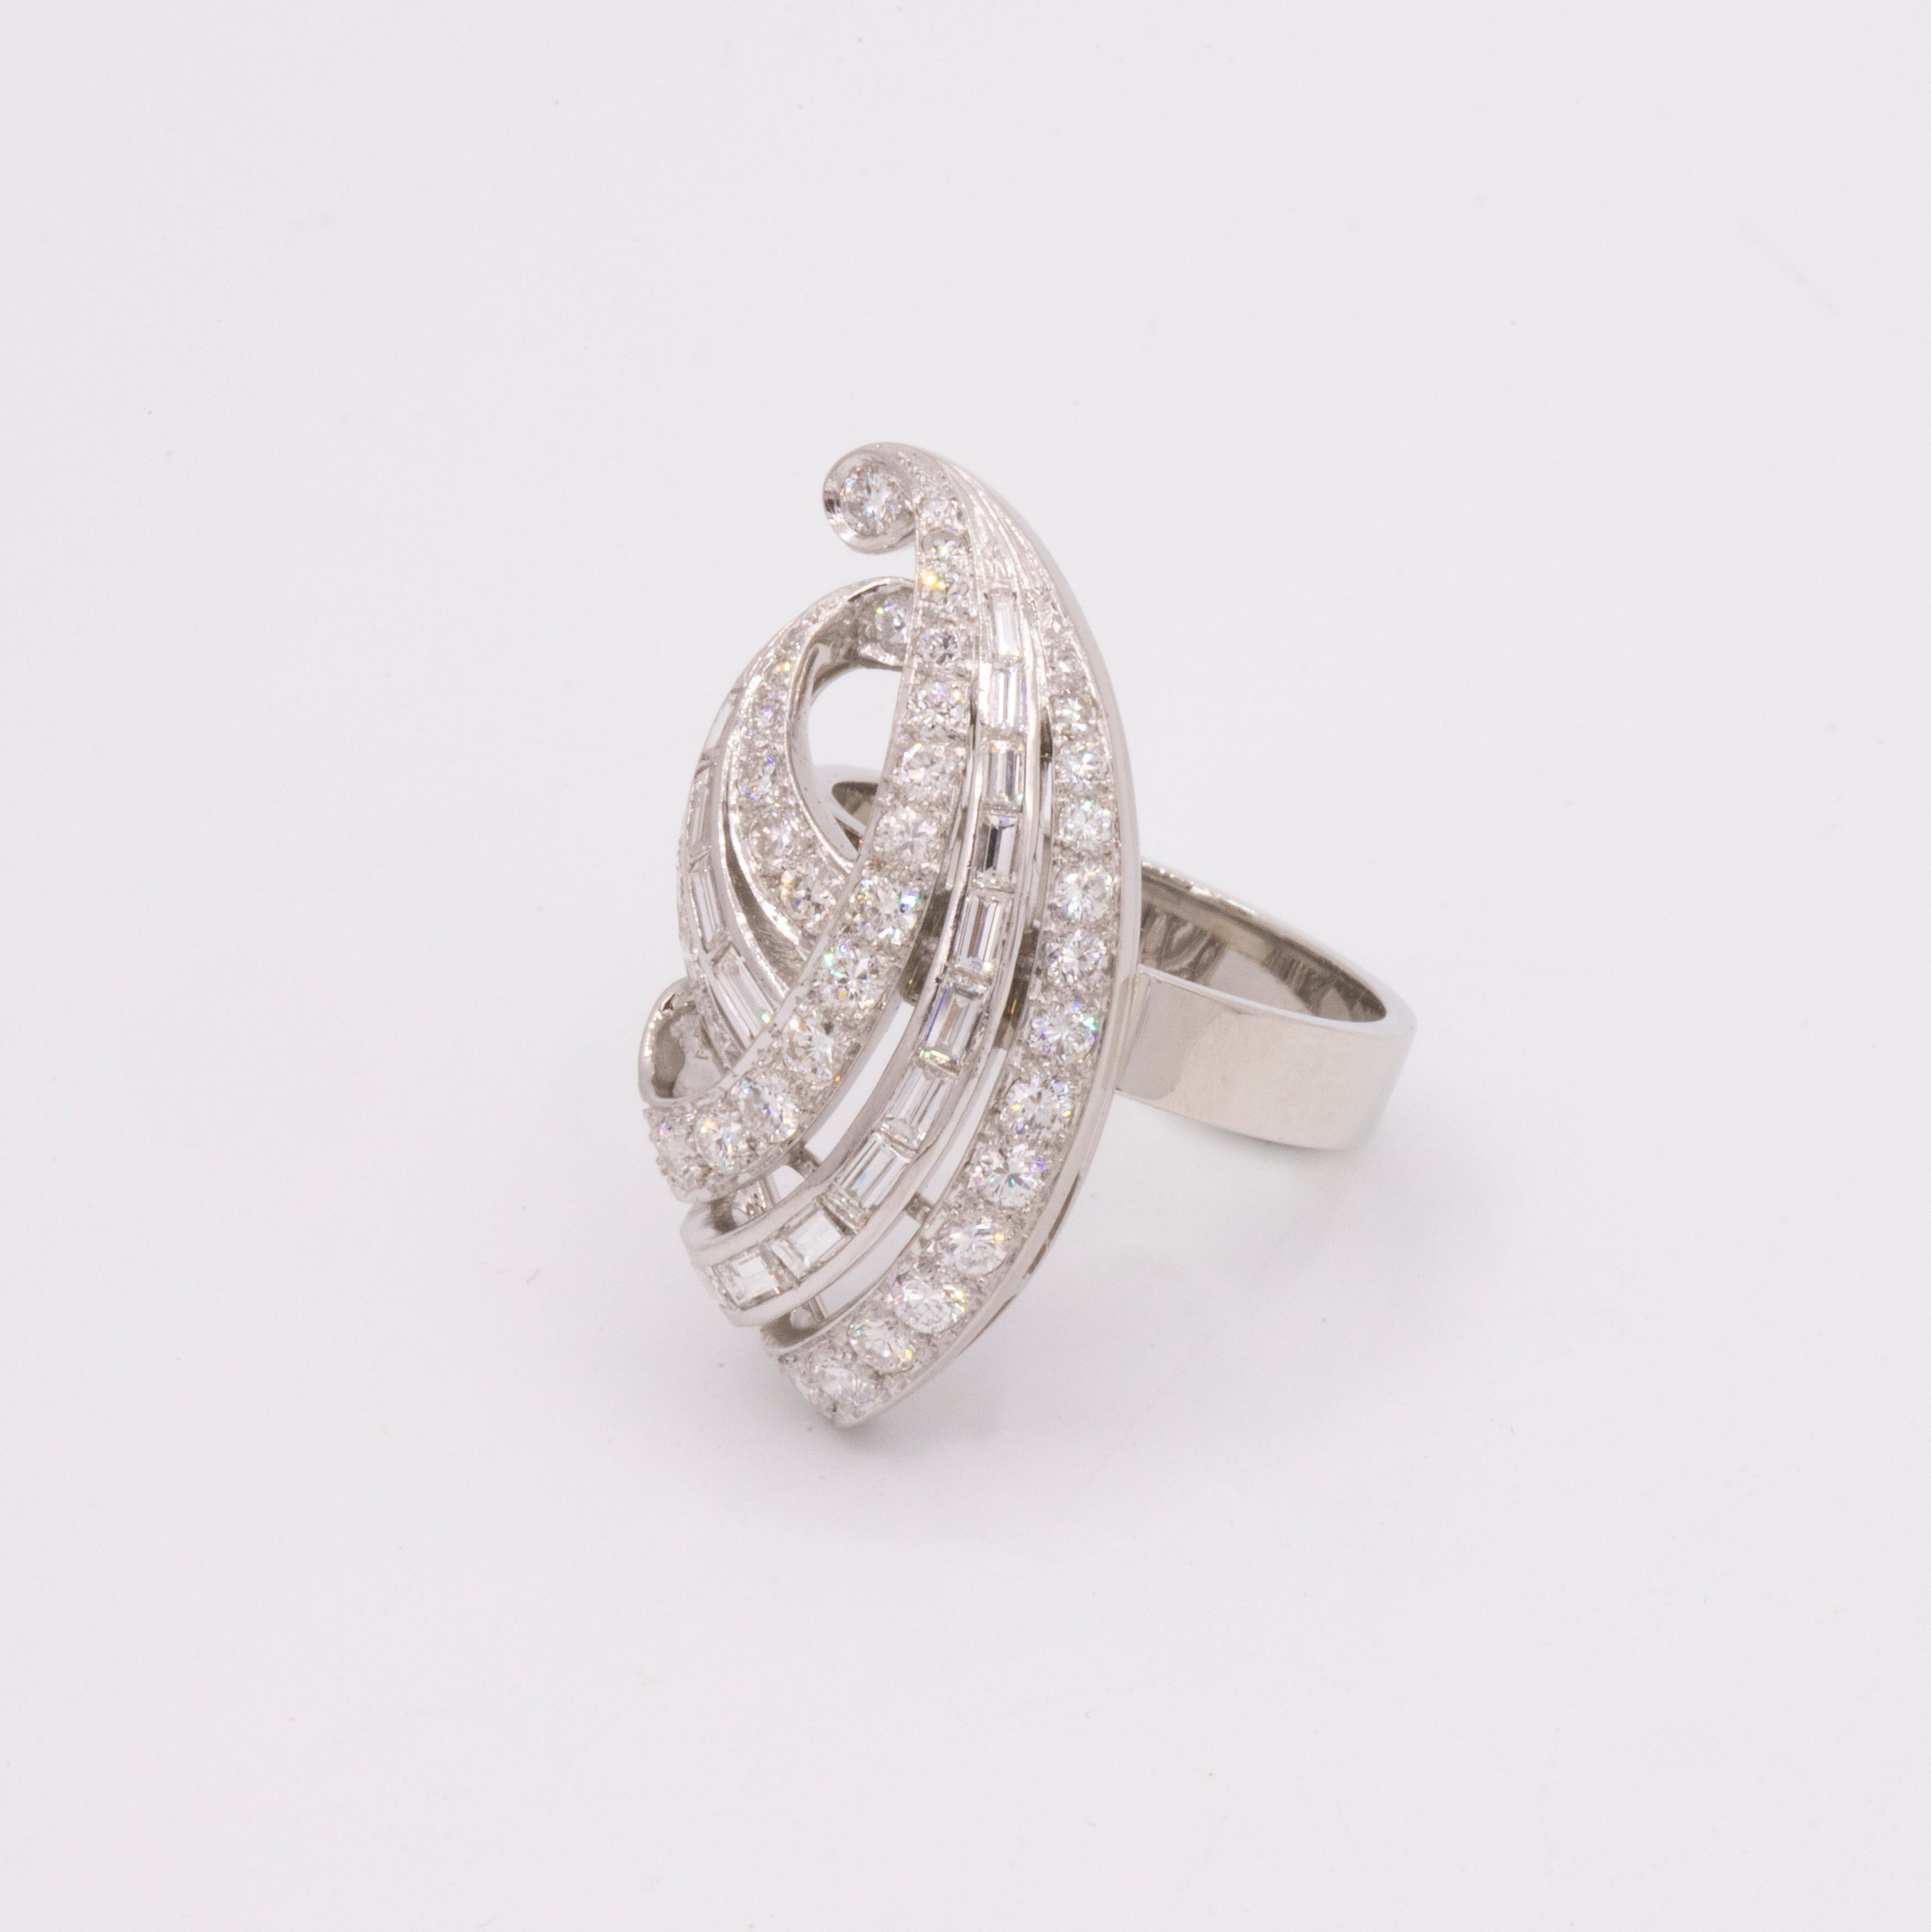 Vintage,  Circa 1940s Diamond Swirl Ring. The diamonds are cut in two different styles, Baguette & Round Brilliant. There are 36 Round Brilliant cut diamonds with a total weight of 1.00 carat. There are 15 Baguette diamonds with a total weight of